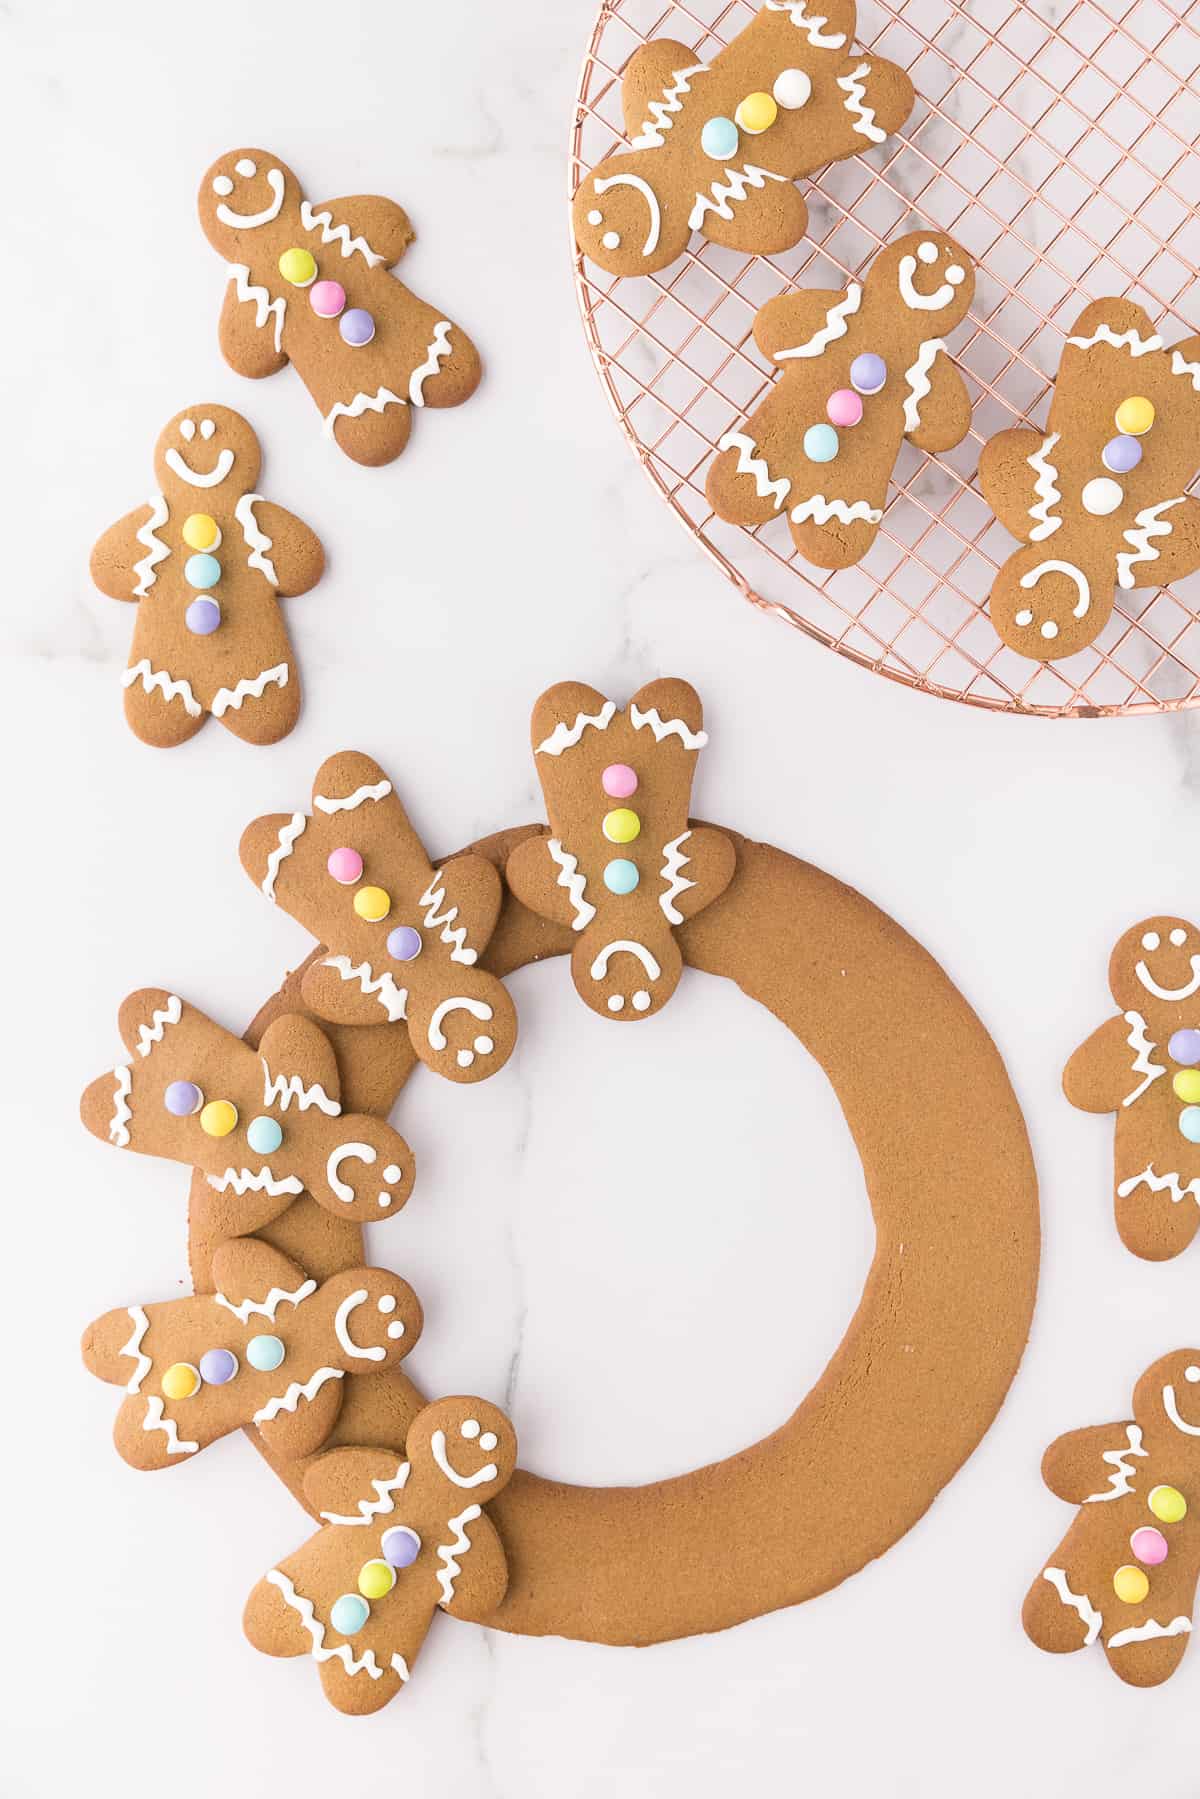 Assembling the gingerbread man wreath on white marble background. 